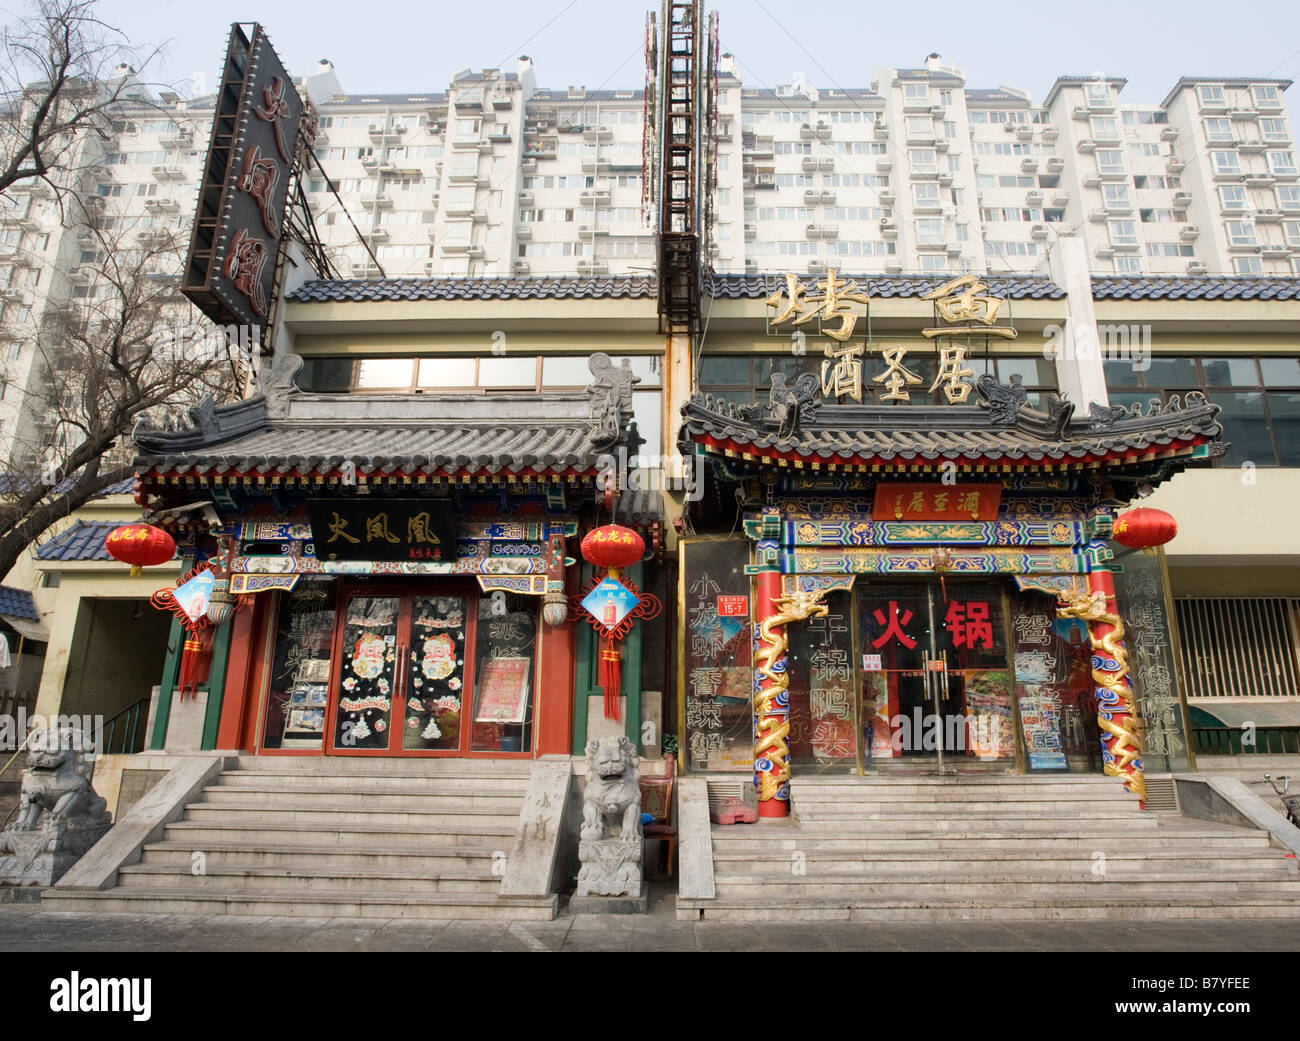 Contrast between traditional ornate old buildings with restaurants and modern apartment buildings to rear in central Beijing Stock Photo